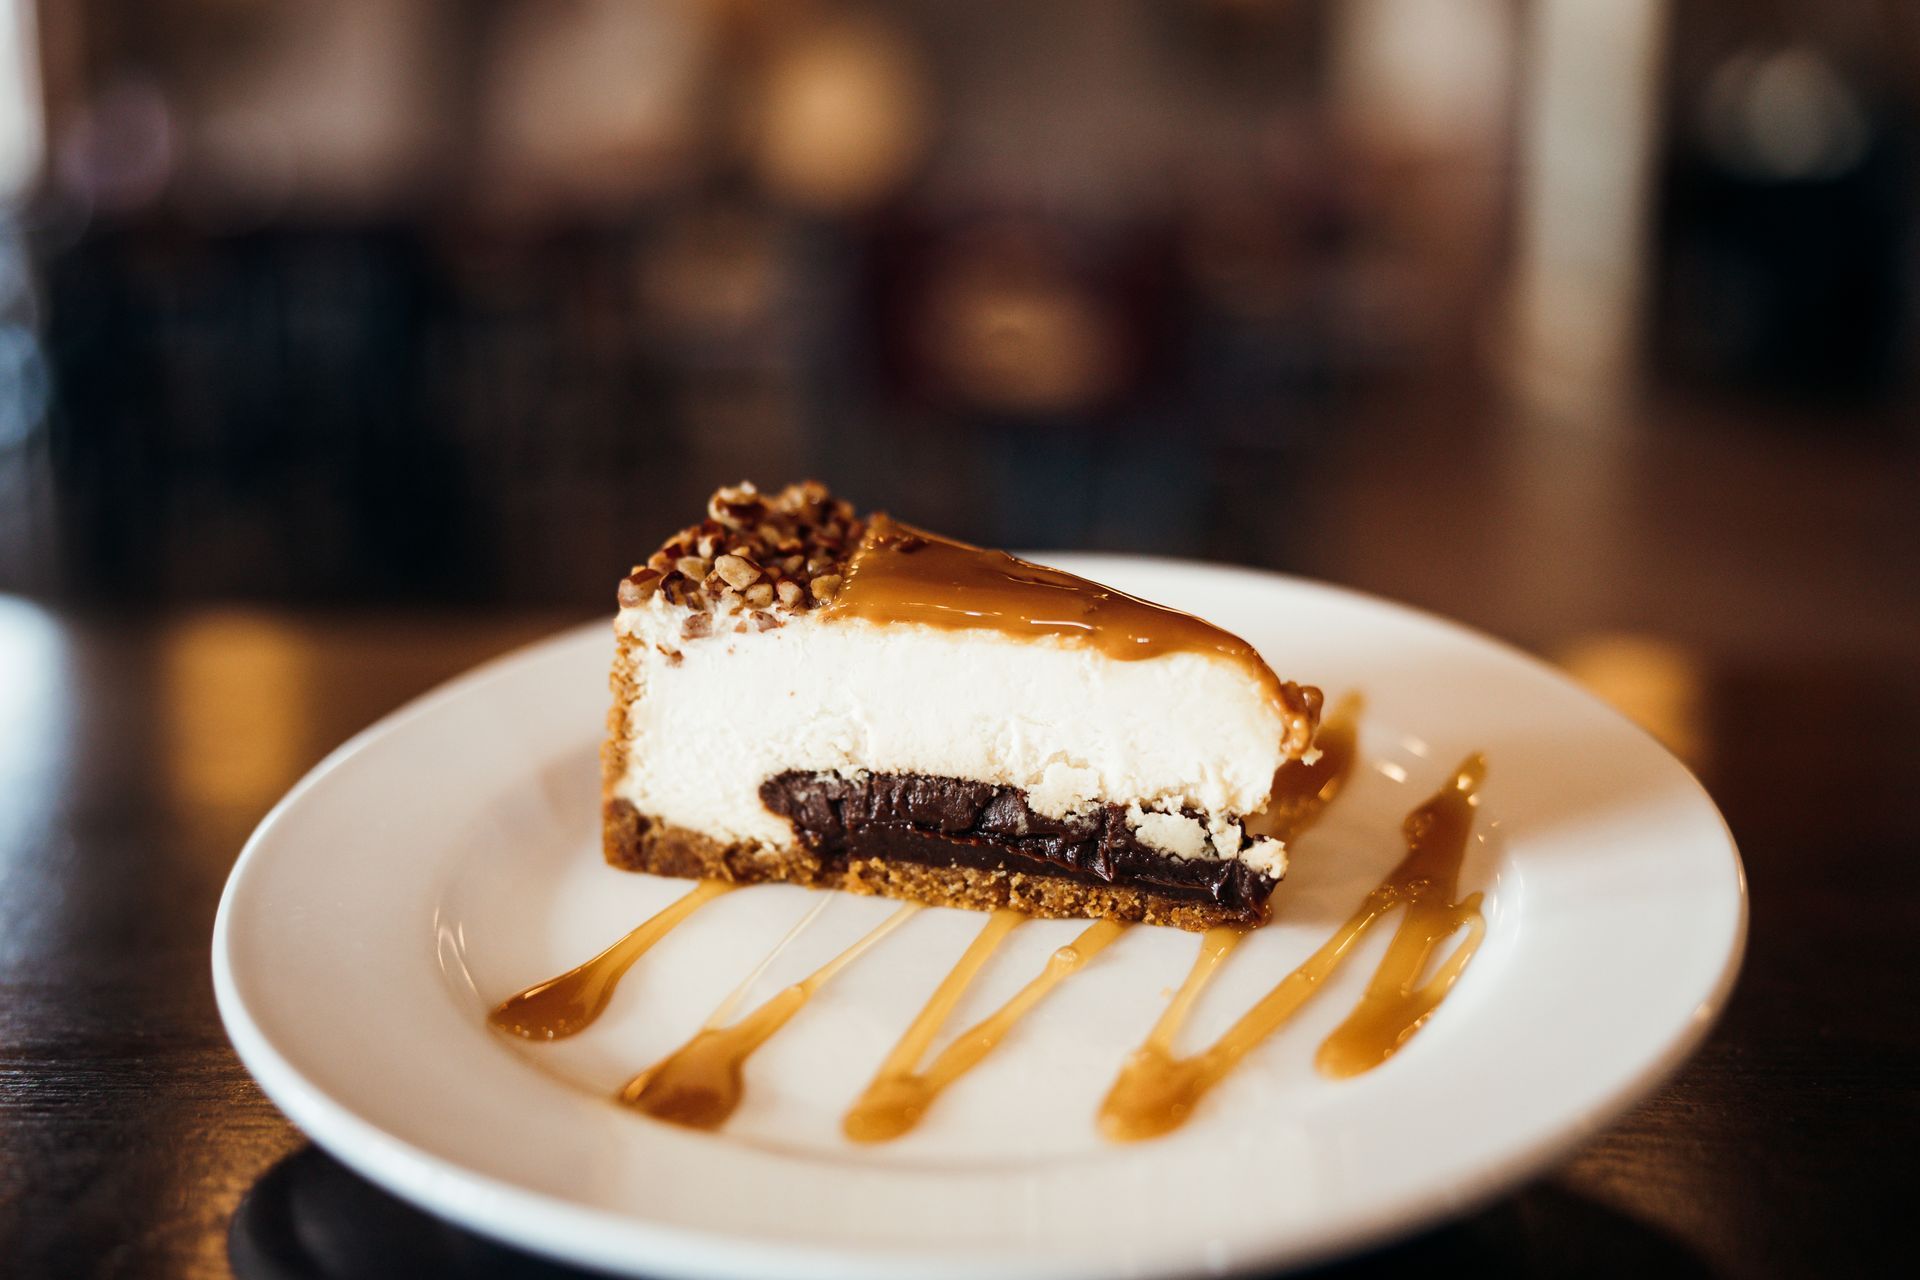 Enjoy Decadent Cheese Cake & Sweet Desserts at the Hill in the Jefferson City, MO Area.